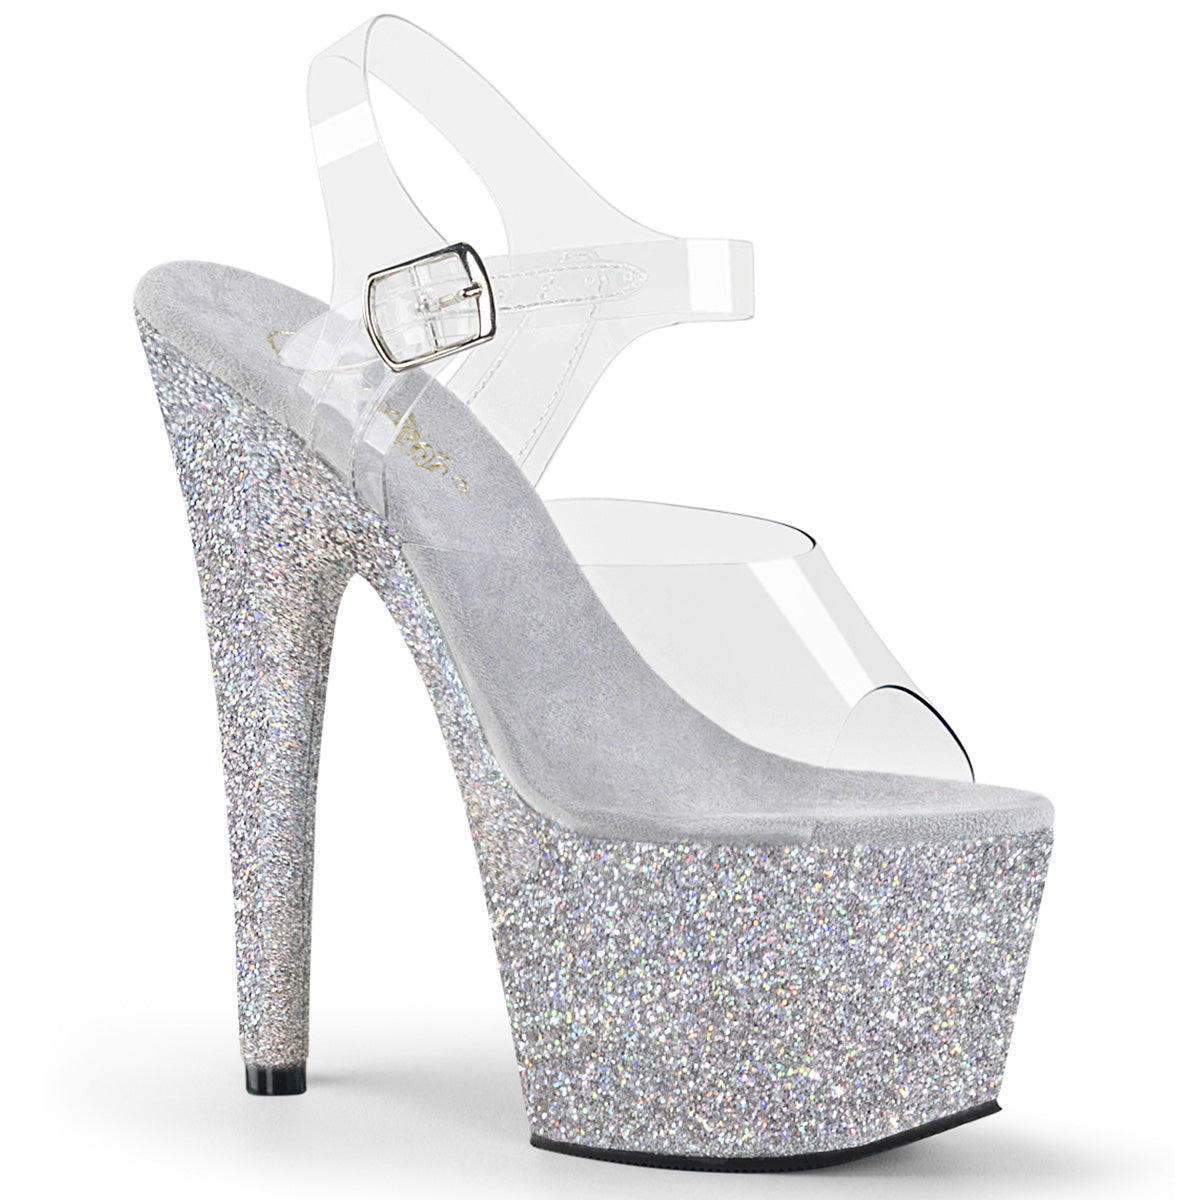 Adore-708hmg Sexy 7 "Heel Clear Silver Glitter Pole Shoes